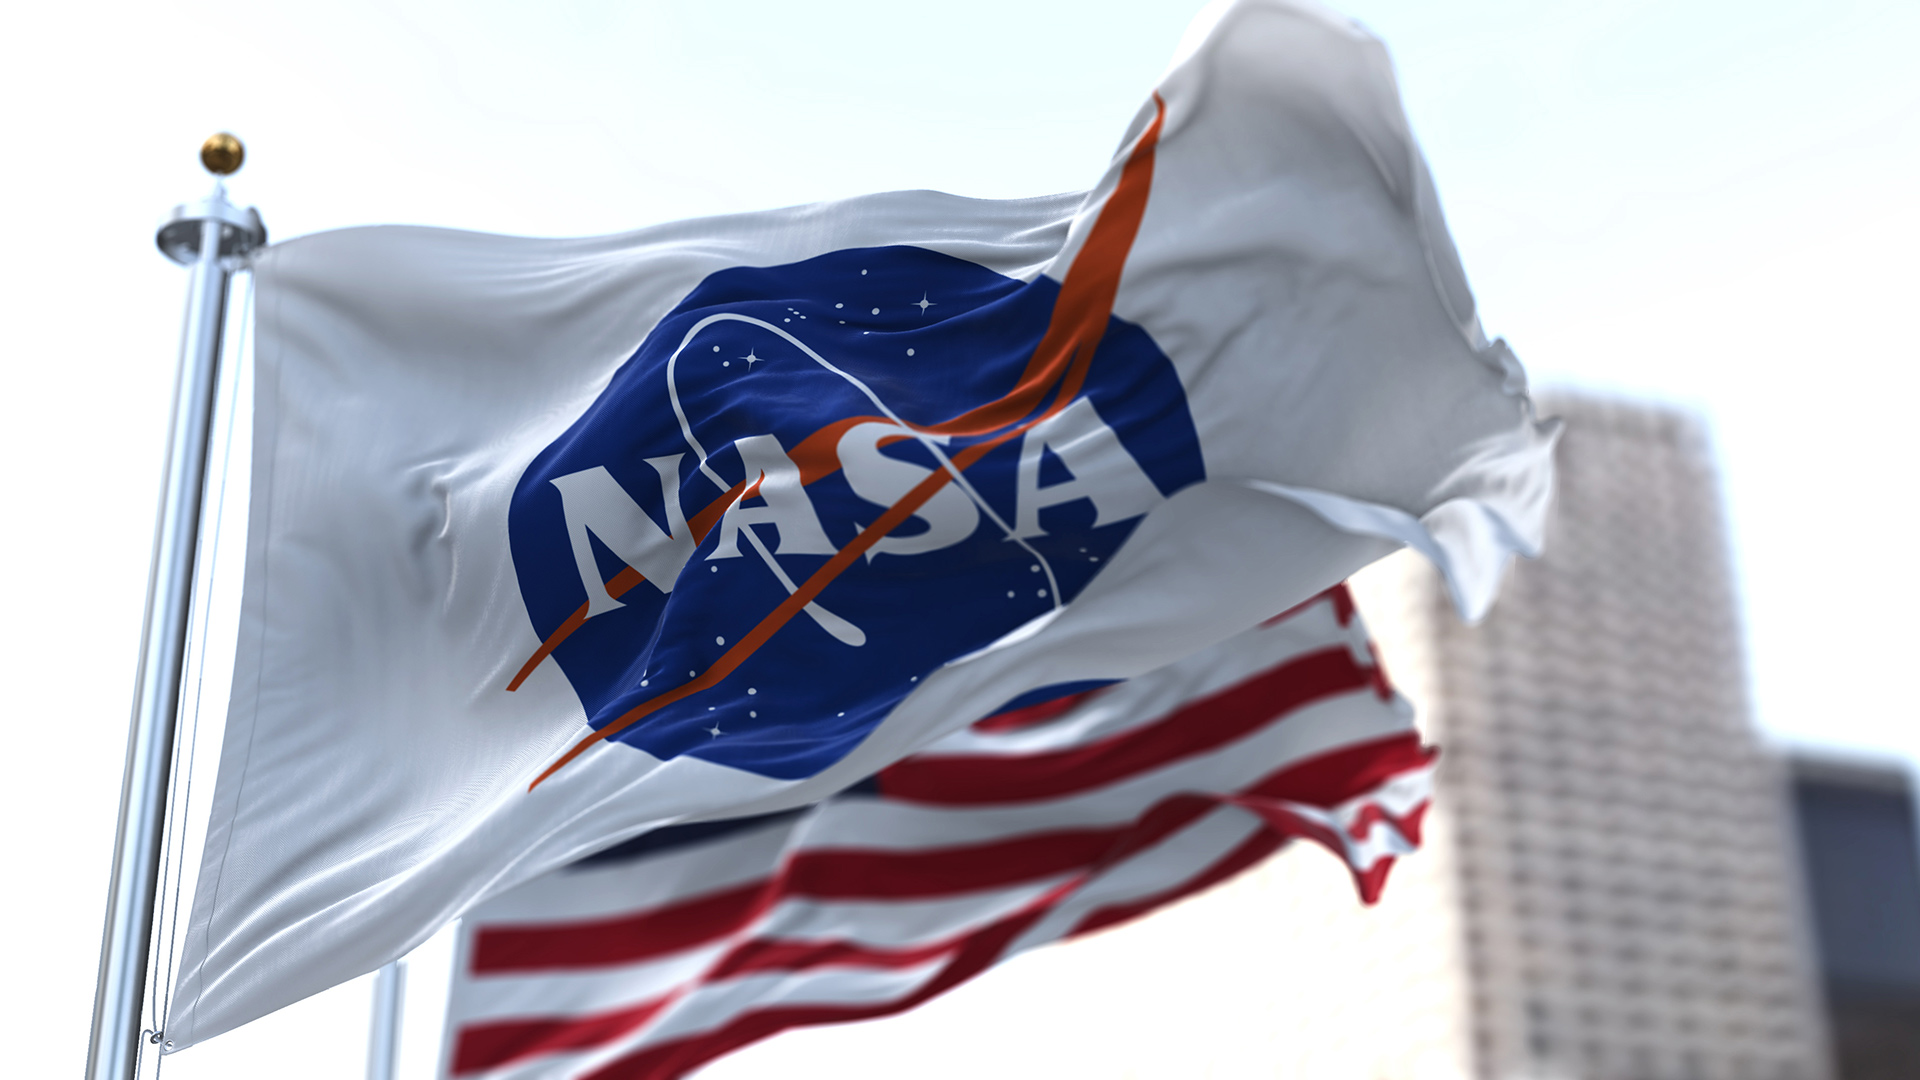 NASA interns' guidance to students: persistence pays off